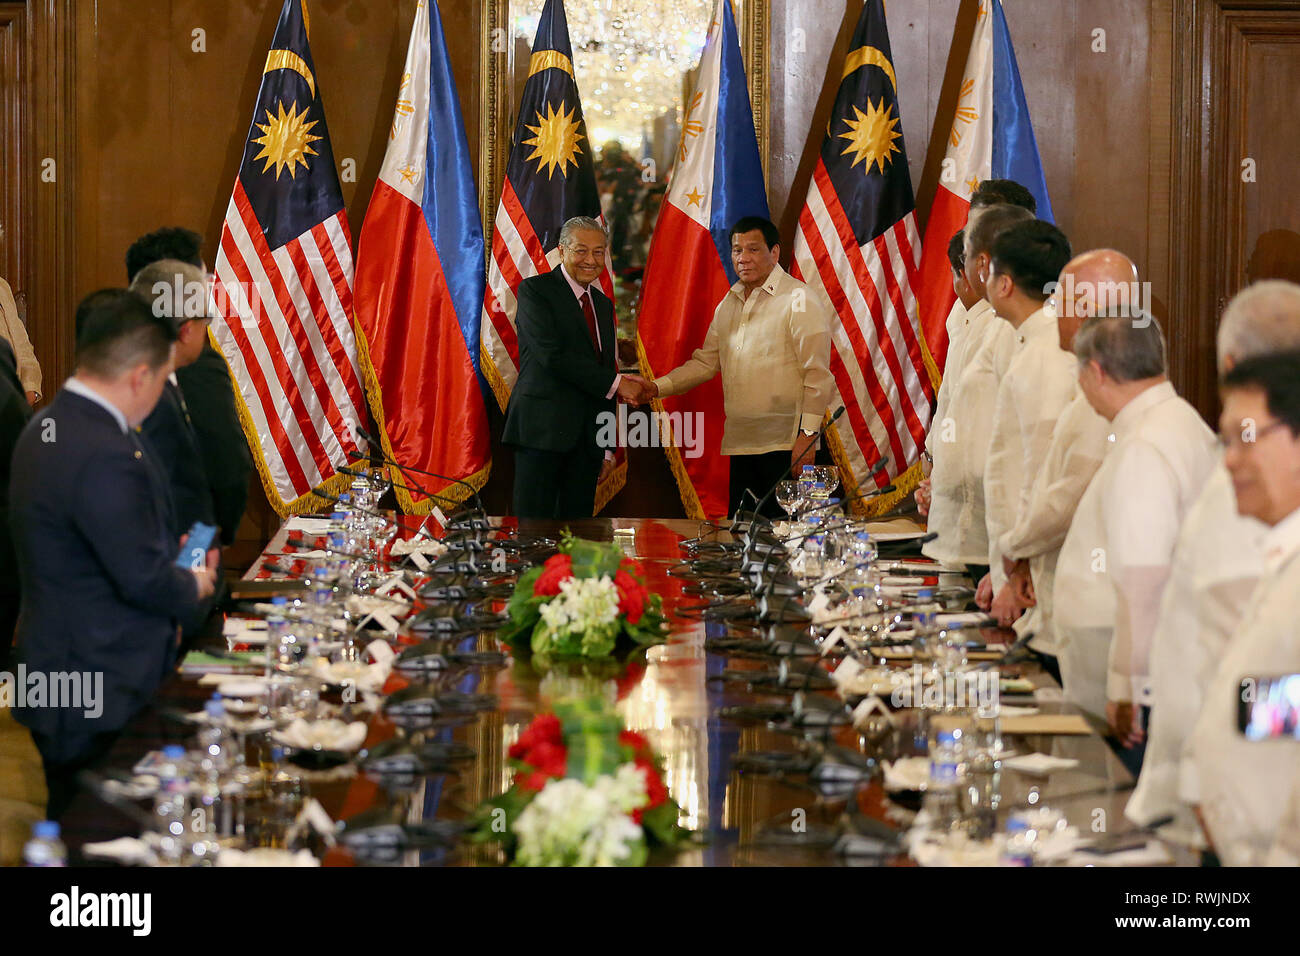 Manila, Philippines. 7th Mar, 2019. Visiting Malaysian Prime Minister Mahathir Mohamad (L, center) shakes hands with Philippine President Rodrigo Duterte (R, center) during a welcoming ceremony at the Malacanang presidential palace in Manila, the Philippines, March 7, 2019. Credit: Rouelle Umali/Xinhua/Alamy Live News Stock Photo